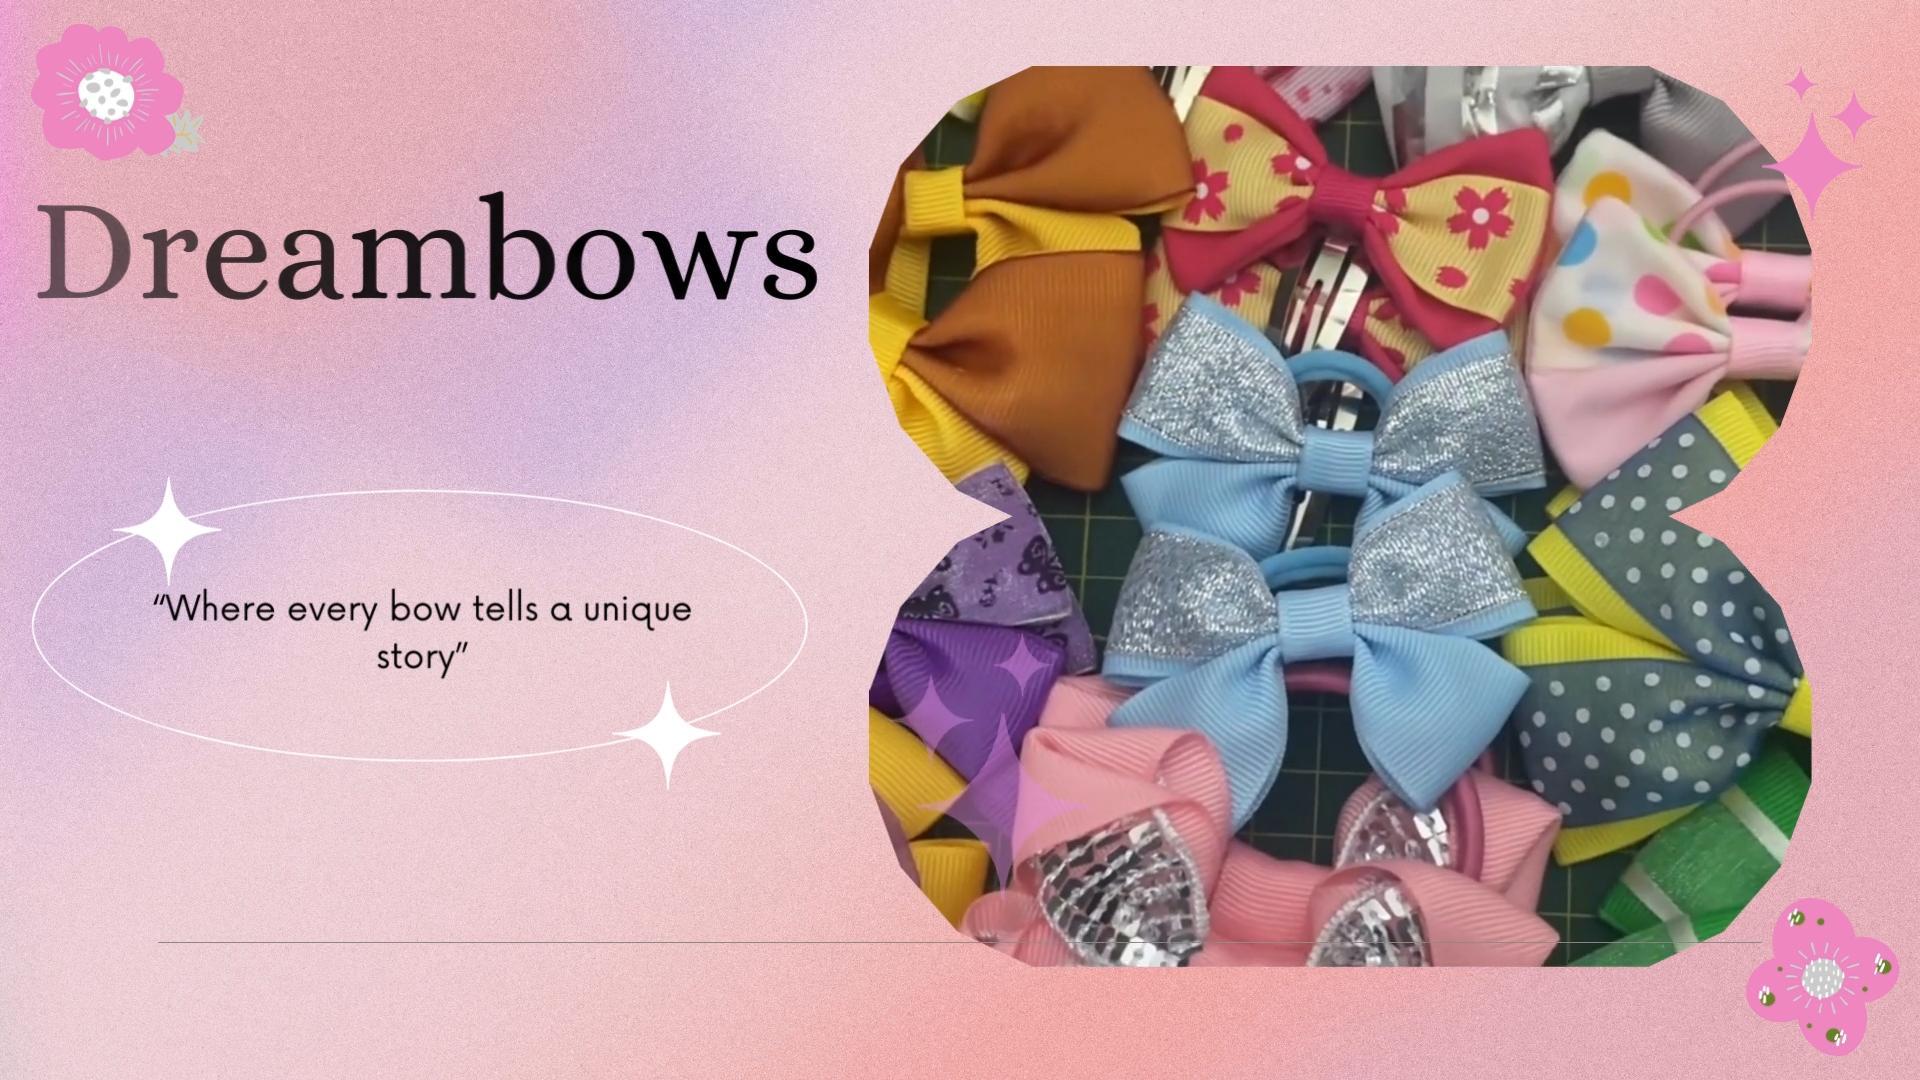 Load video: Dreambows - Where every bow tells a unique story